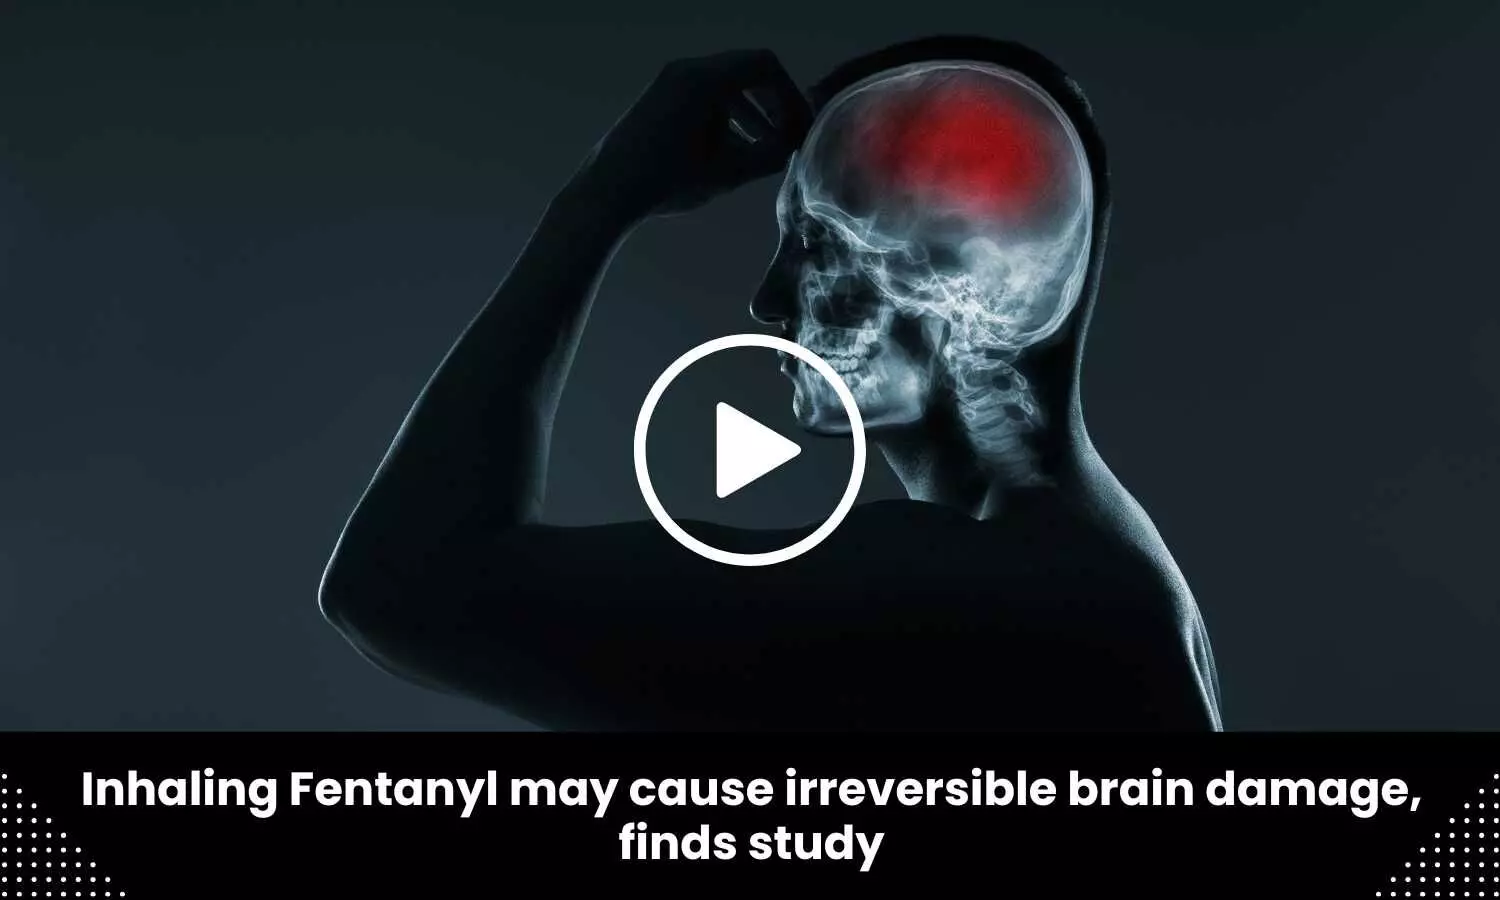 Inhaling Fentanyl may cause irreversible brain damage, finds study